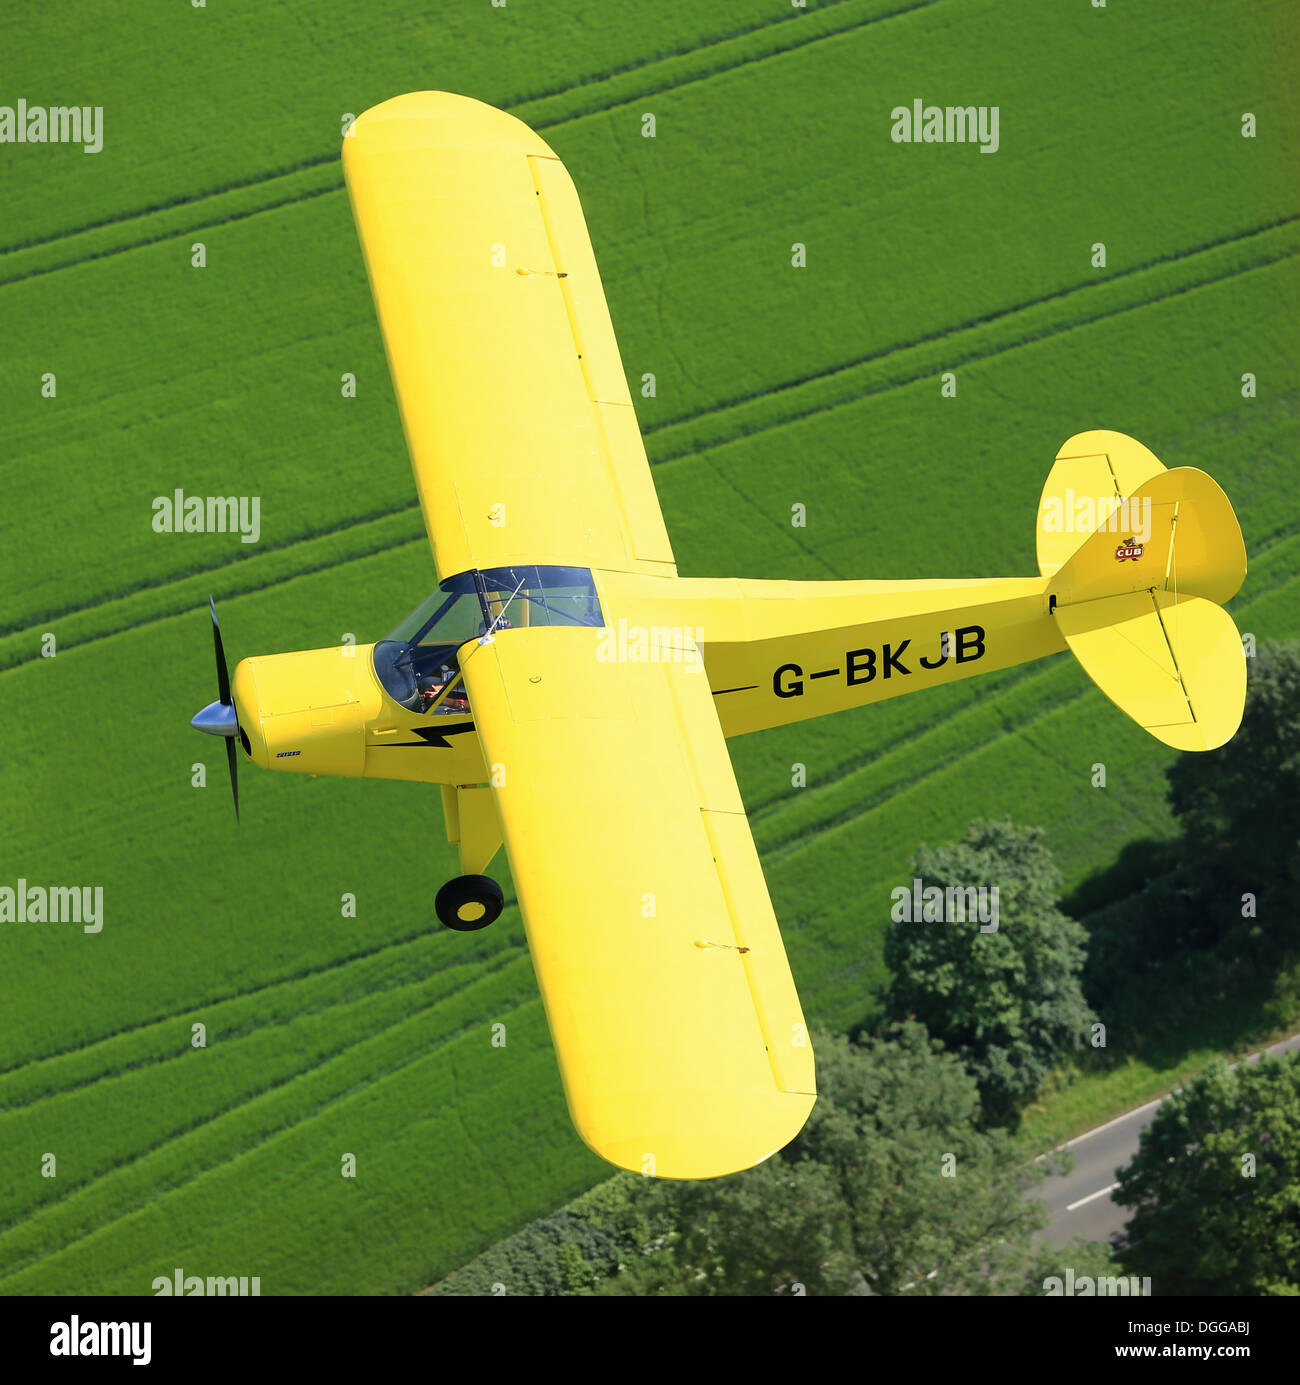 Air to Air image of Piper Super Cub Stock Photo